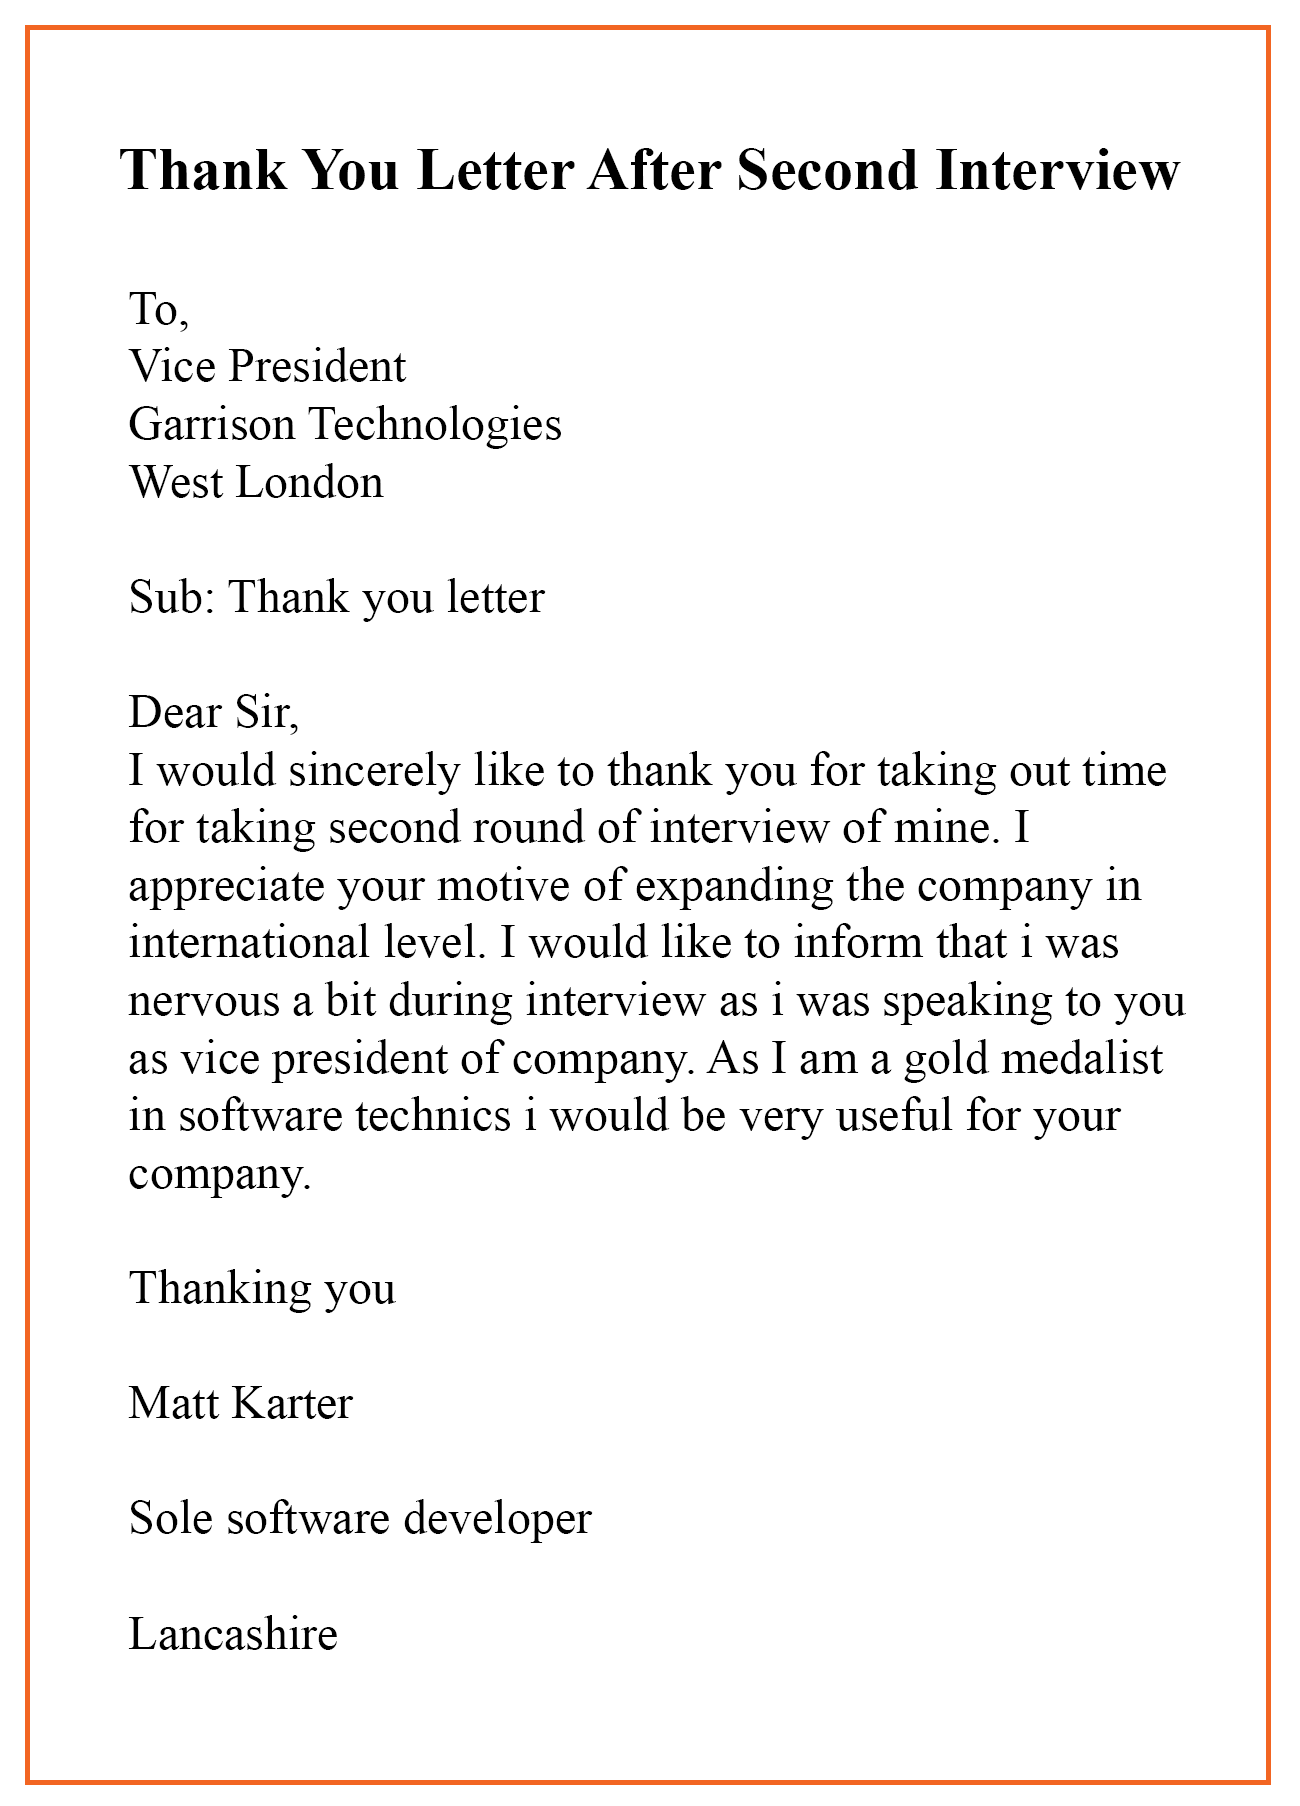 Interview Thank You Letter